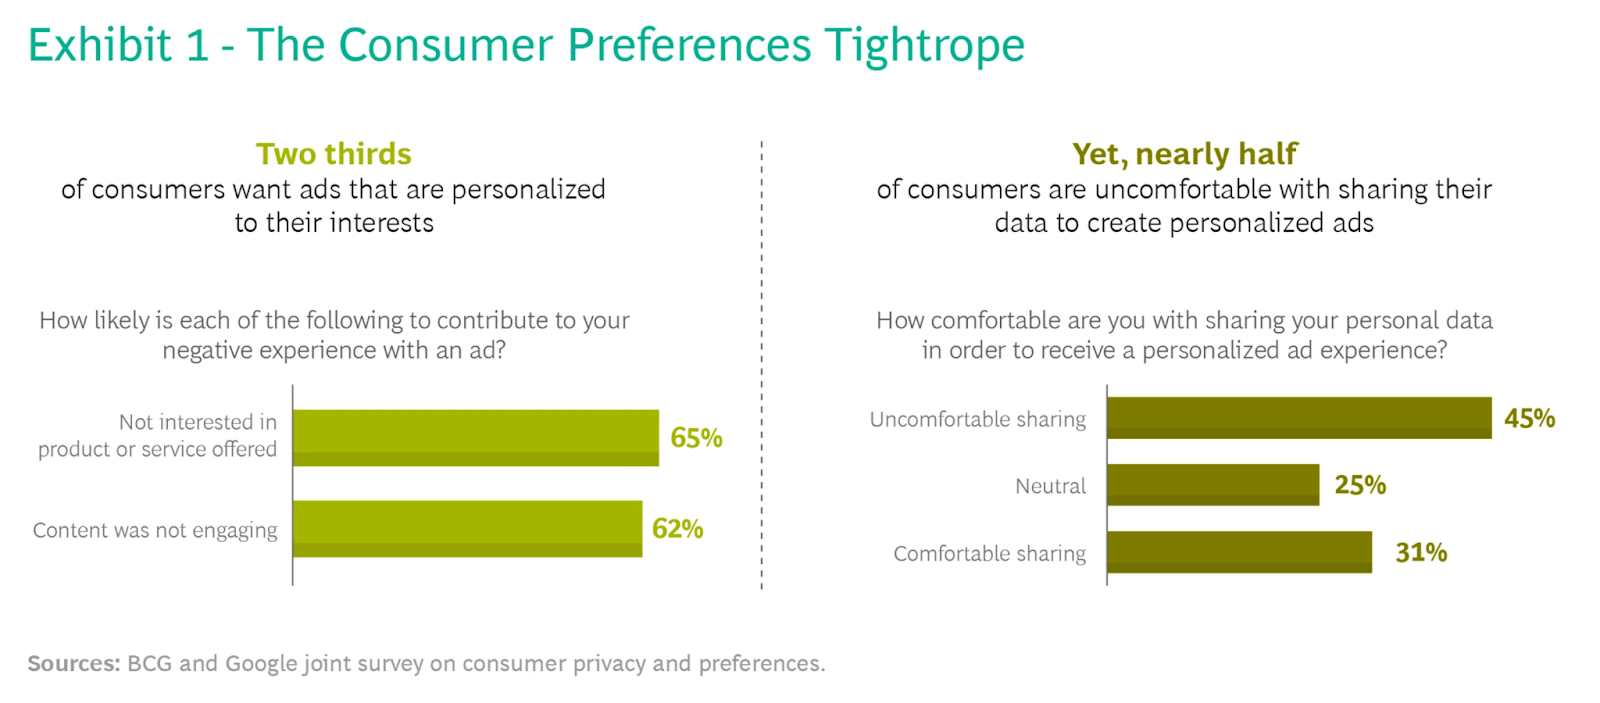 Two graphs show that two thirds of consumers want ads that are personalized to their interests. Yet nearly half of consumers are uncomfortable with sharing their data to create personalized ads.